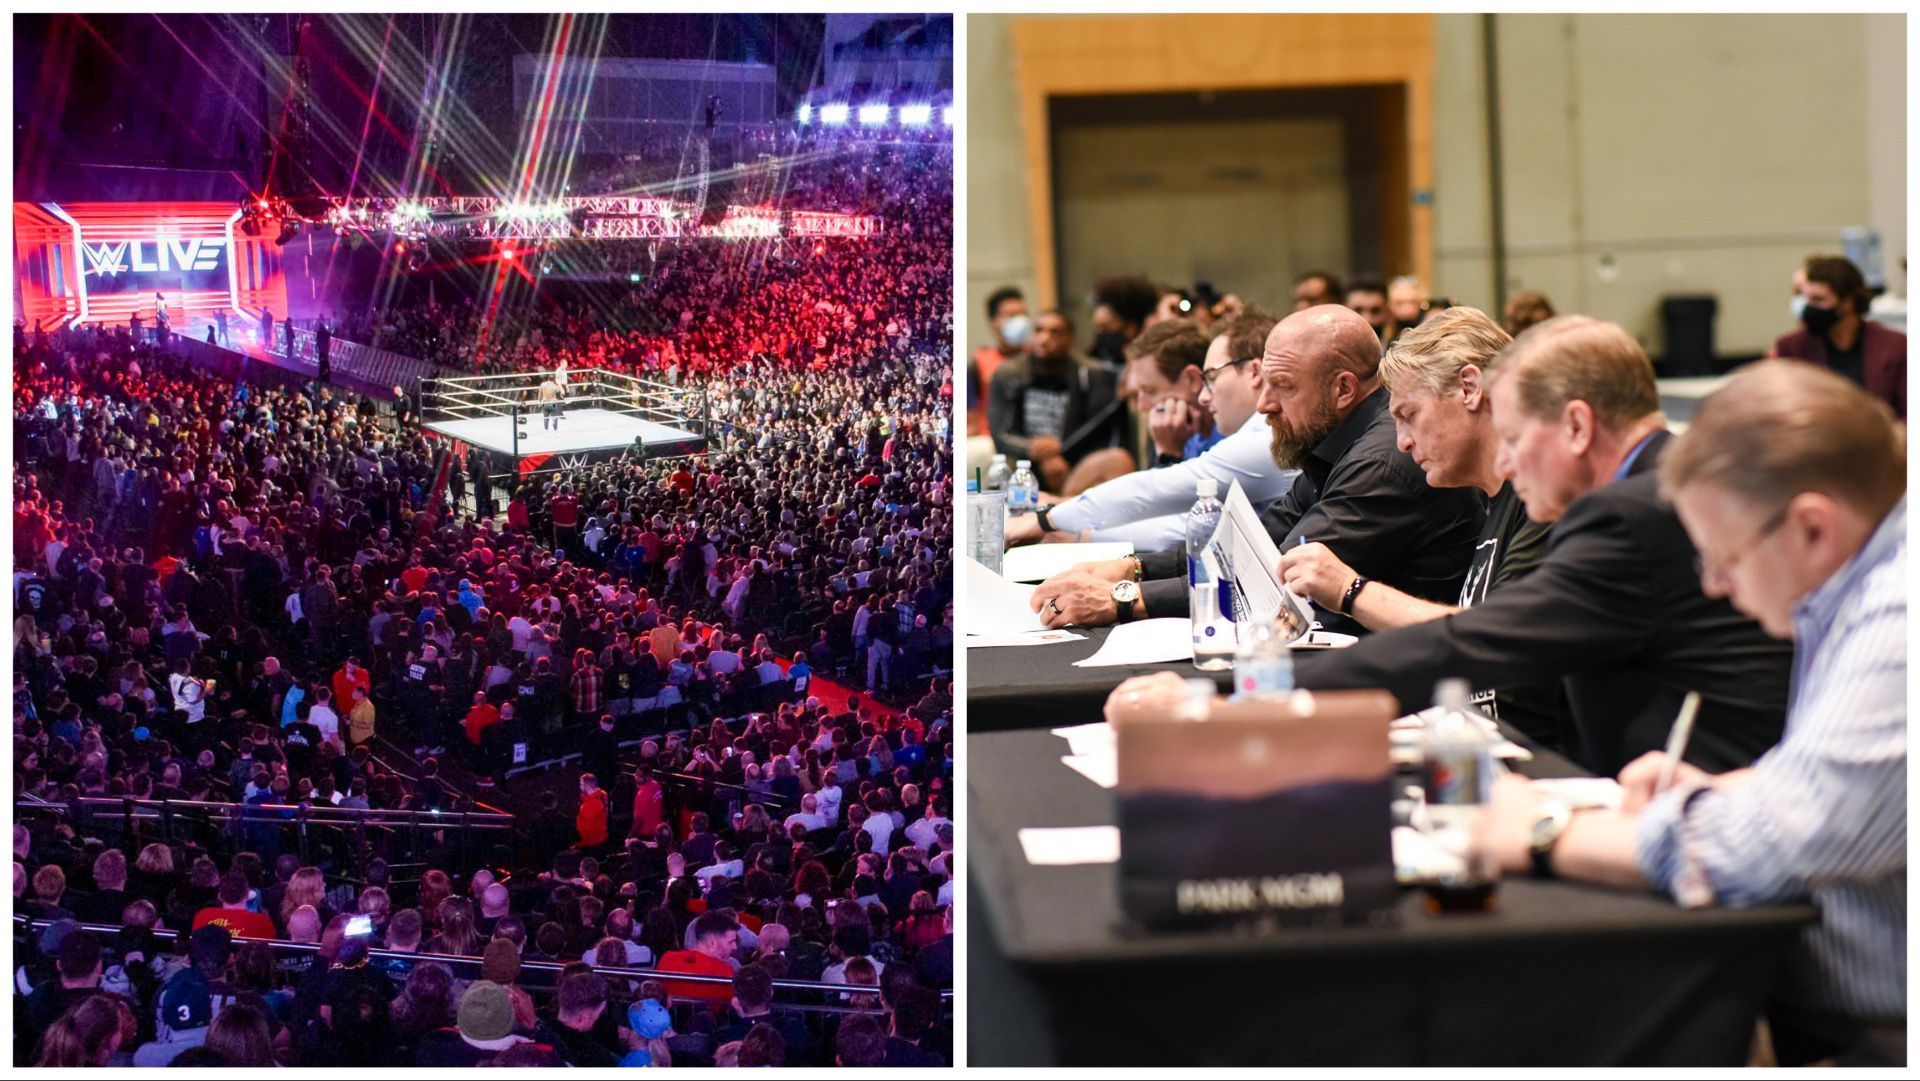 WWE Universe packs their local arena, WWE officials discuss new contracts